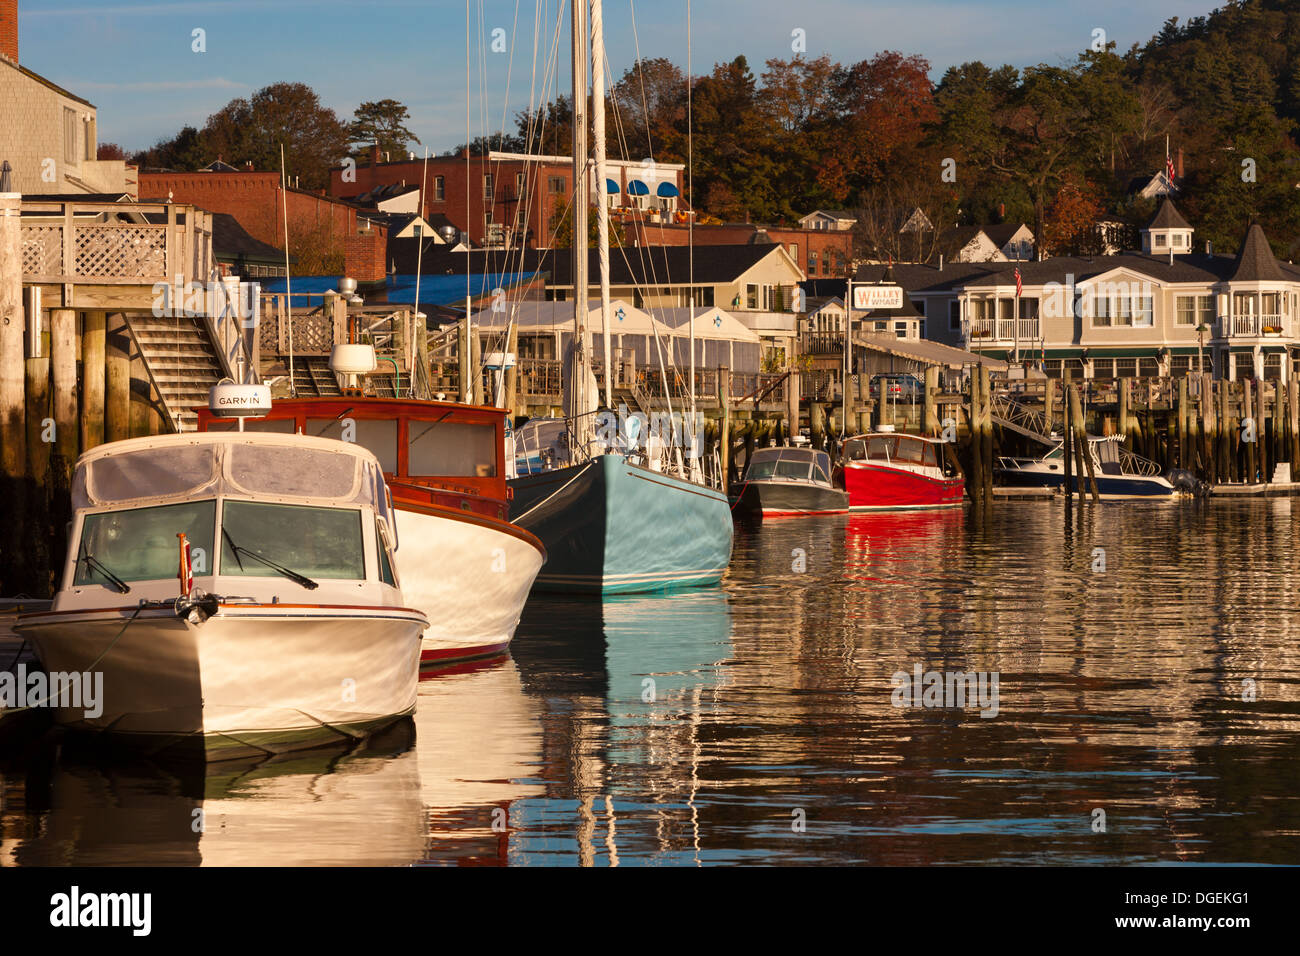 Boats and sailboats docked shortly after sunrise in Camden harbor, Camden, Maine. Stock Photo